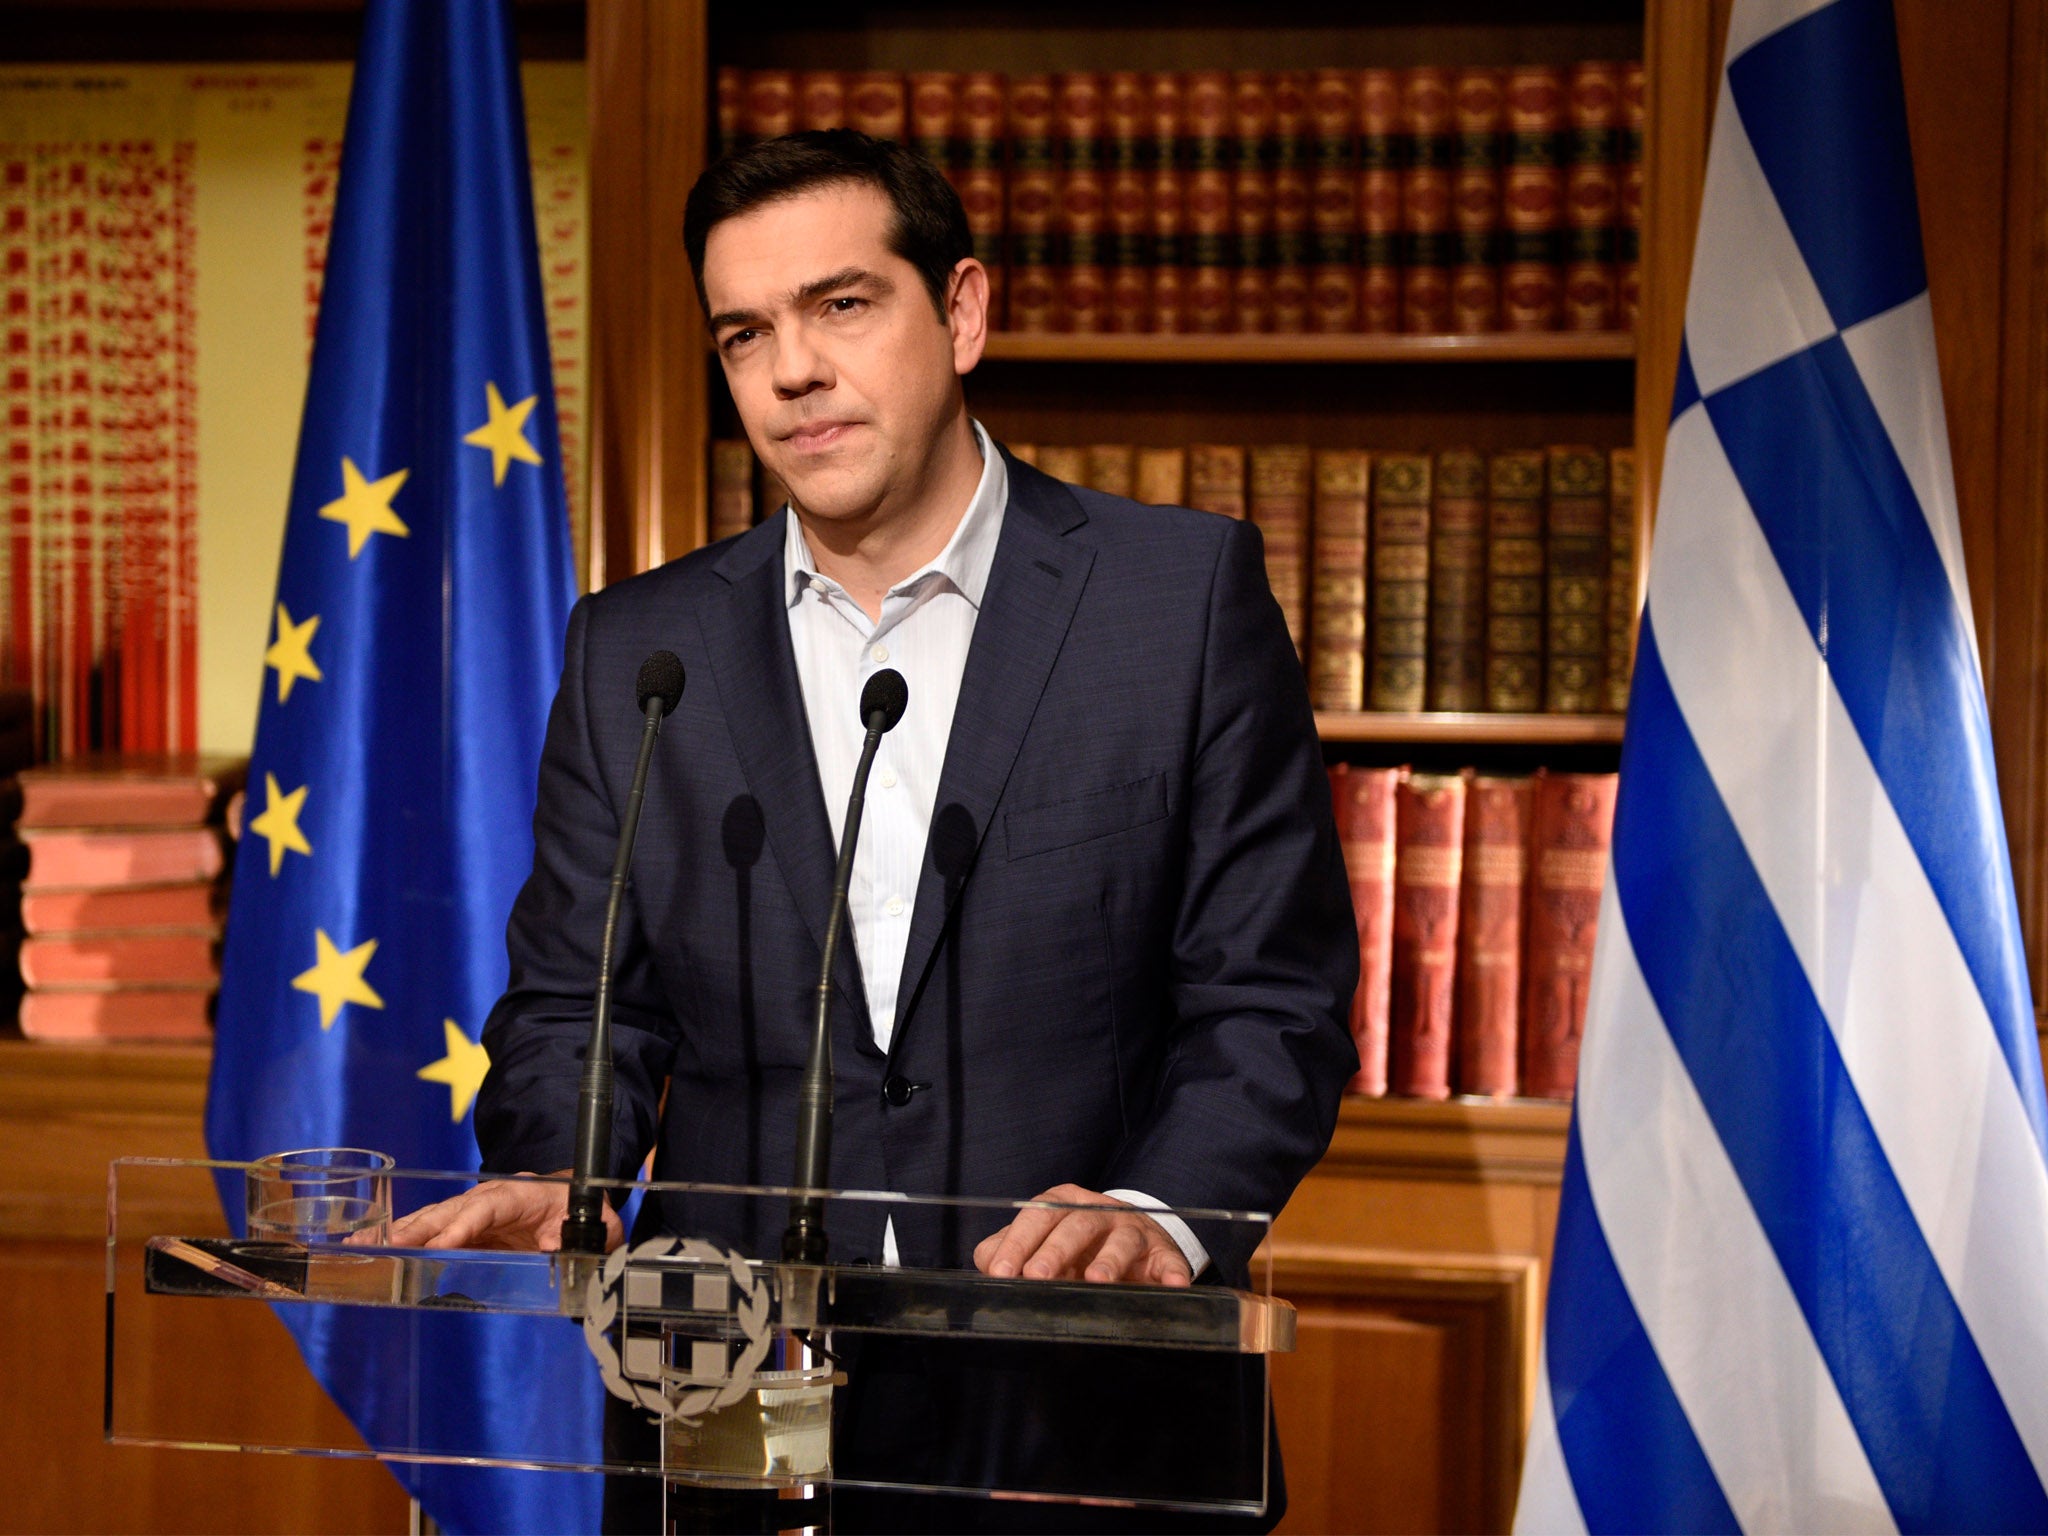 Greek Prime Minister Alexis Tsirpas delivers a televised address to the nation from his office at Maximos Mansion on 1 July 2015 in Athens, Greece